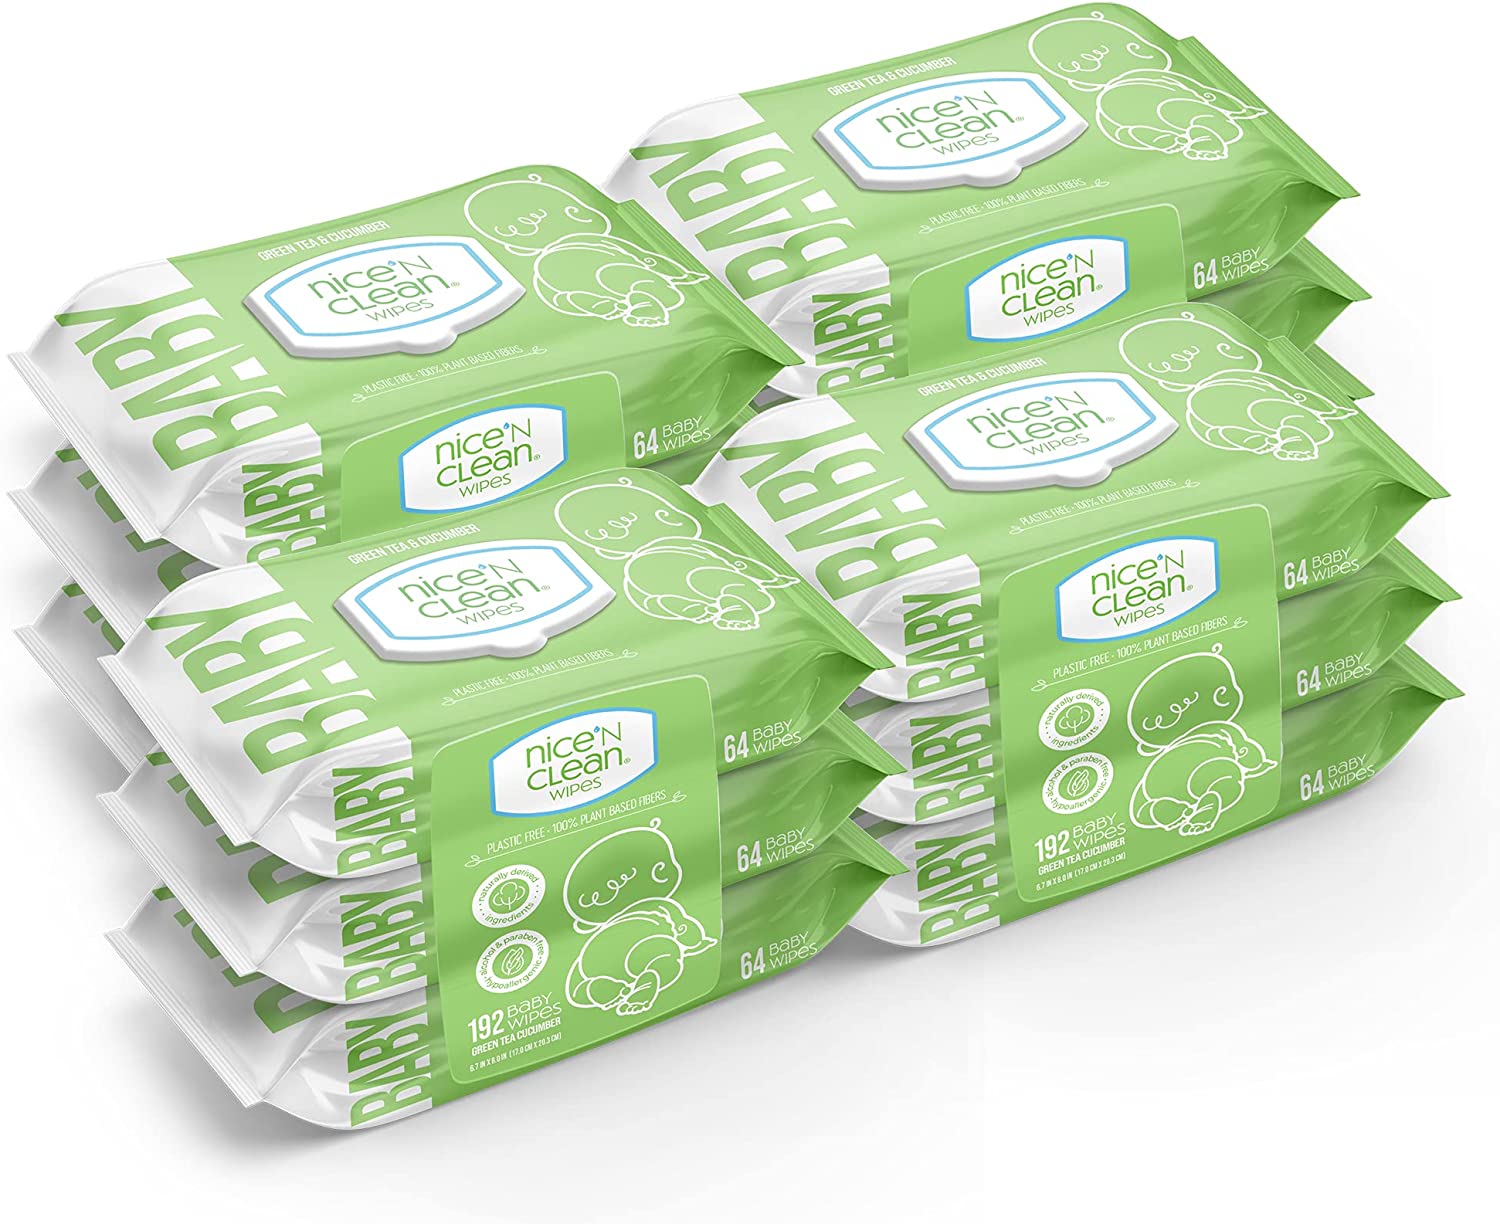 Nice ‘n Clean Plastic-Free Scented Baby Wipes For Sensitive Skin